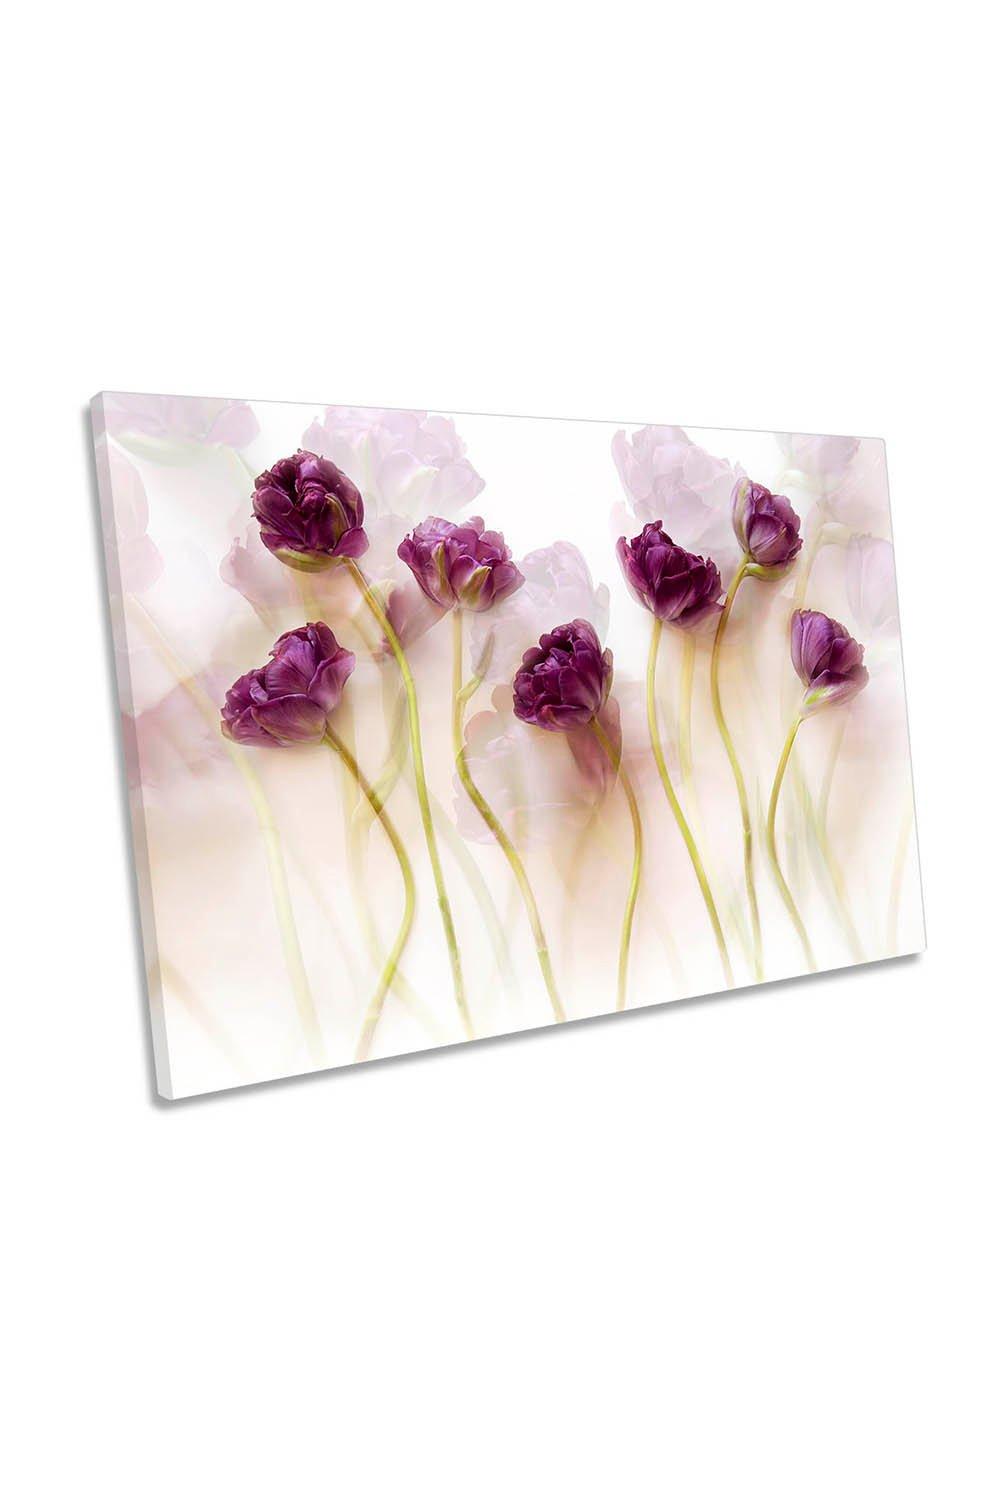 Purple Tulips Floral Flowers Blossom Canvas Wall Art Picture Print